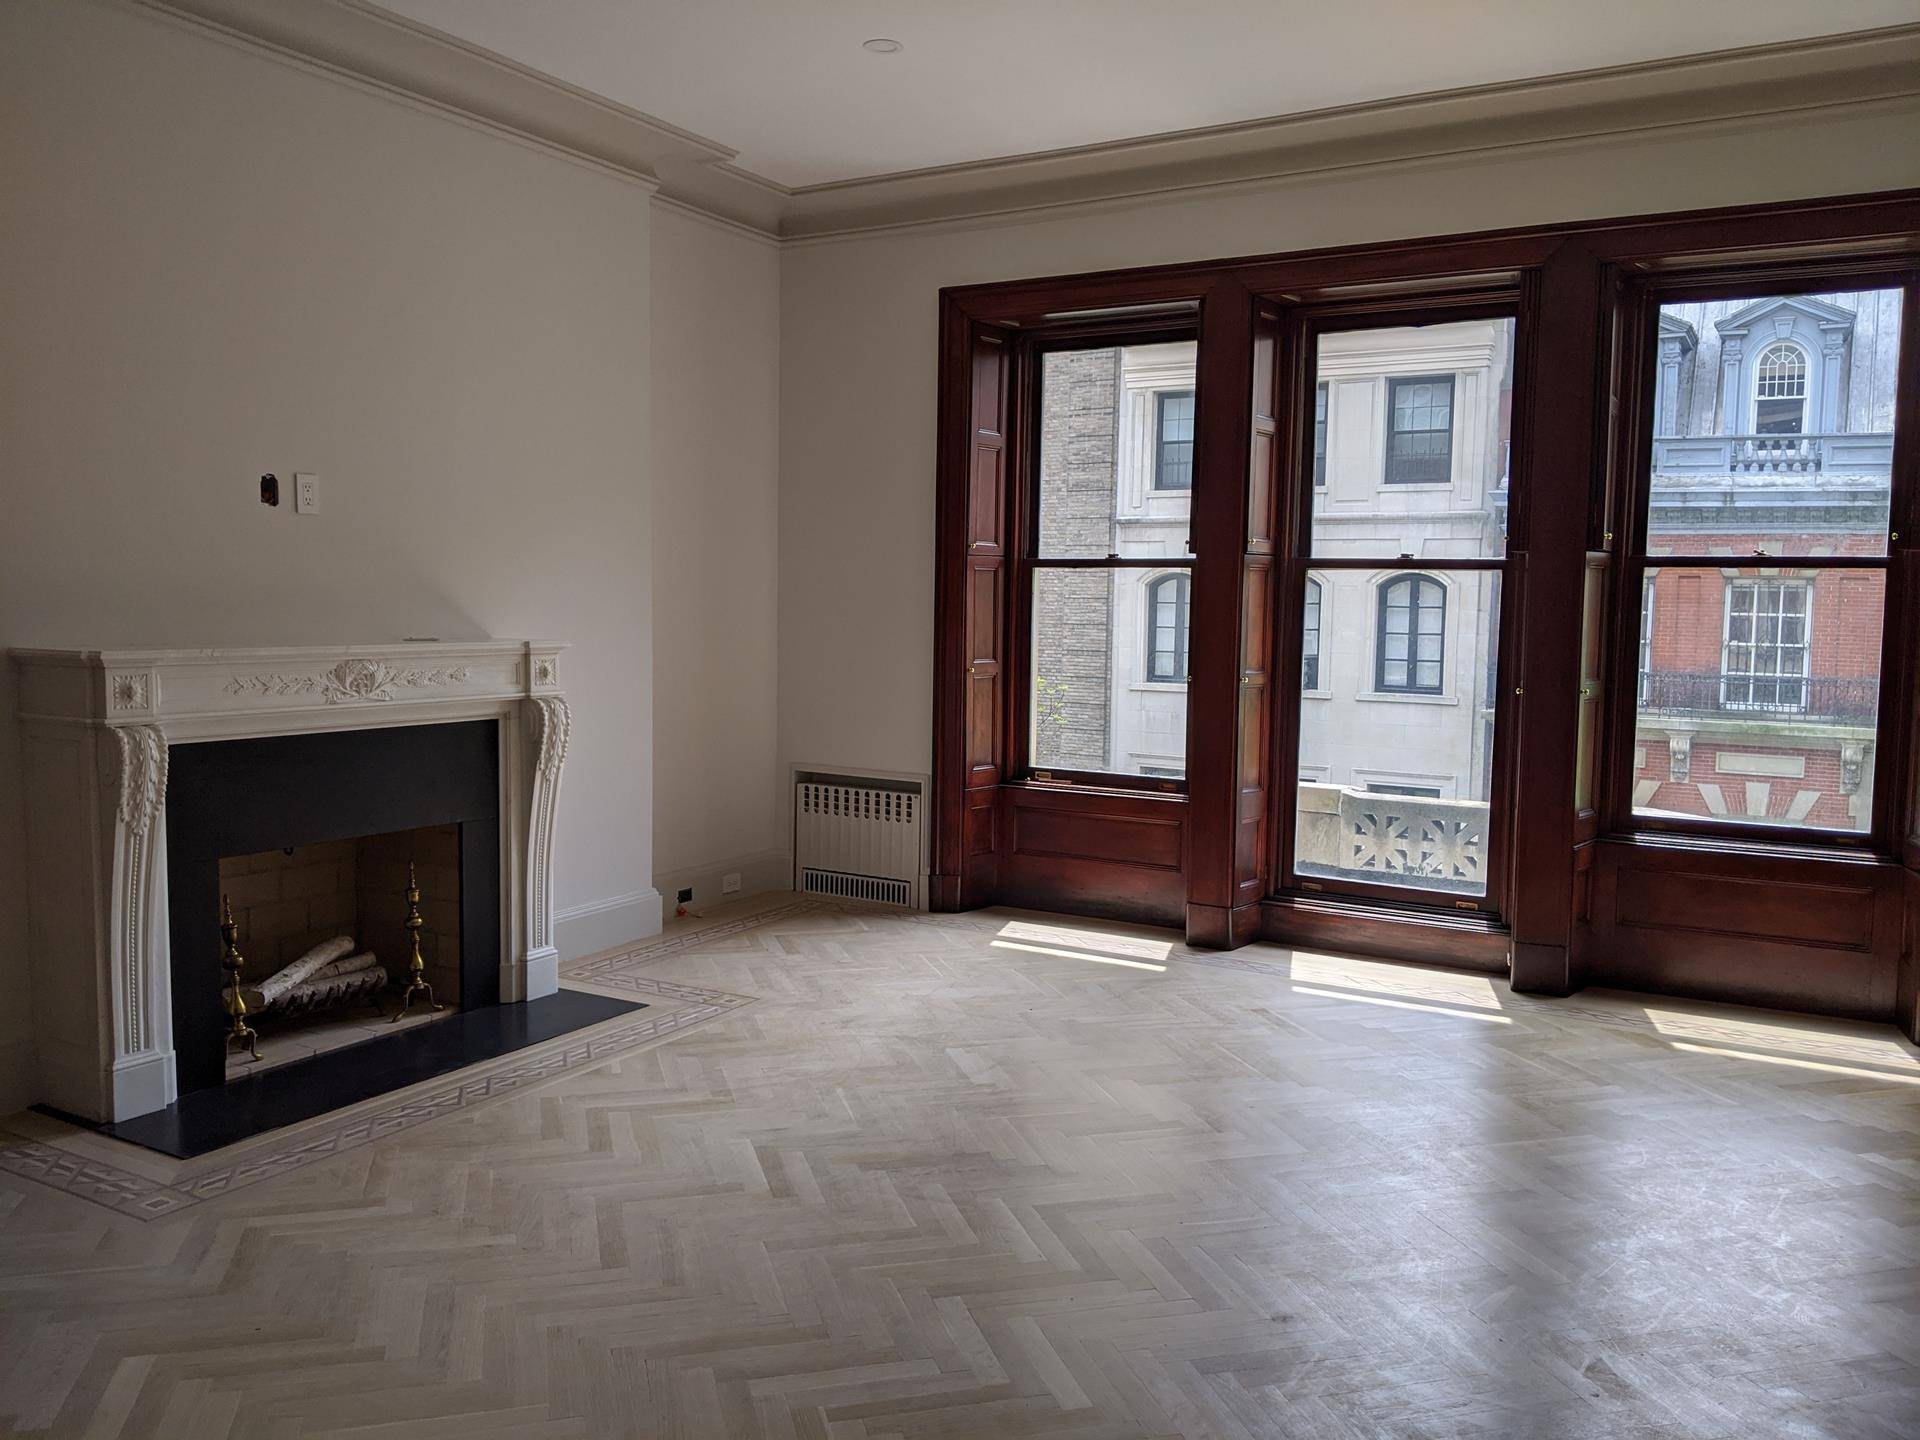 Magnificent 2 bedroom 2 bath located in a limestone mansion directly off Fifth Ave.